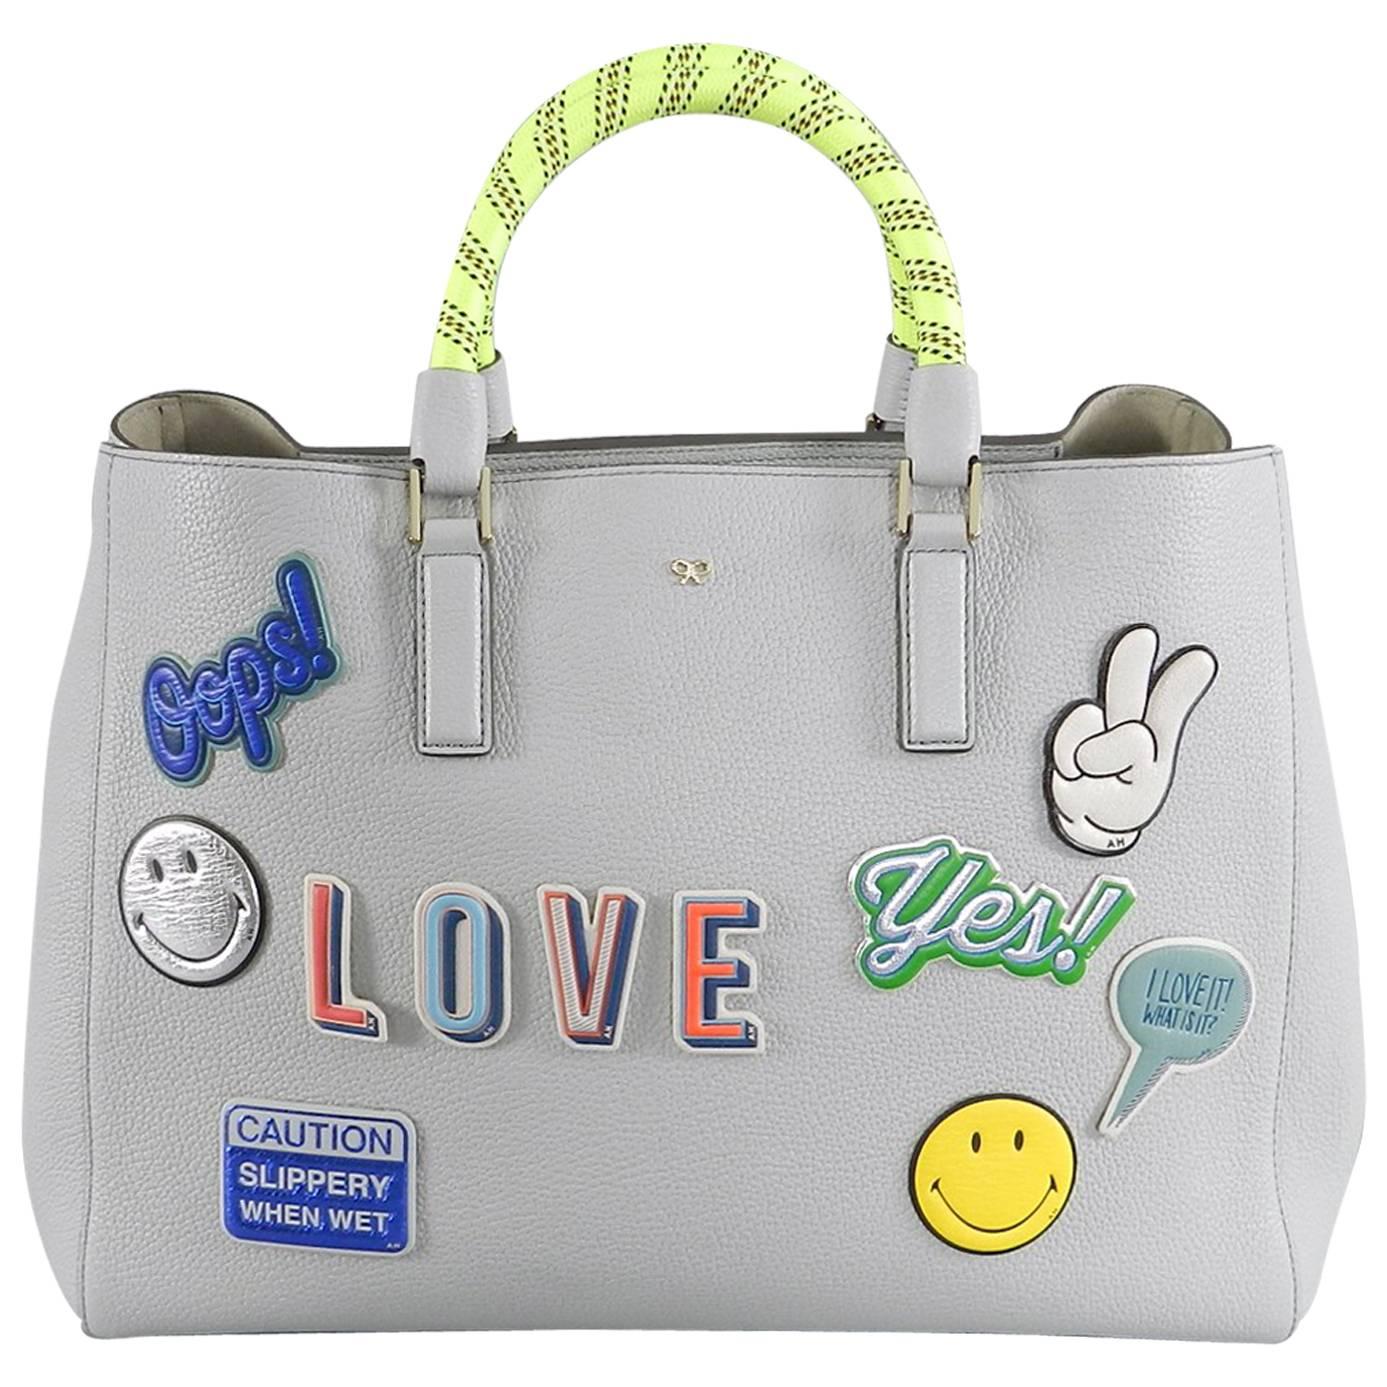 Anya Hindmarch Ebury Large Featherweight bag - Light Blue with Stickers